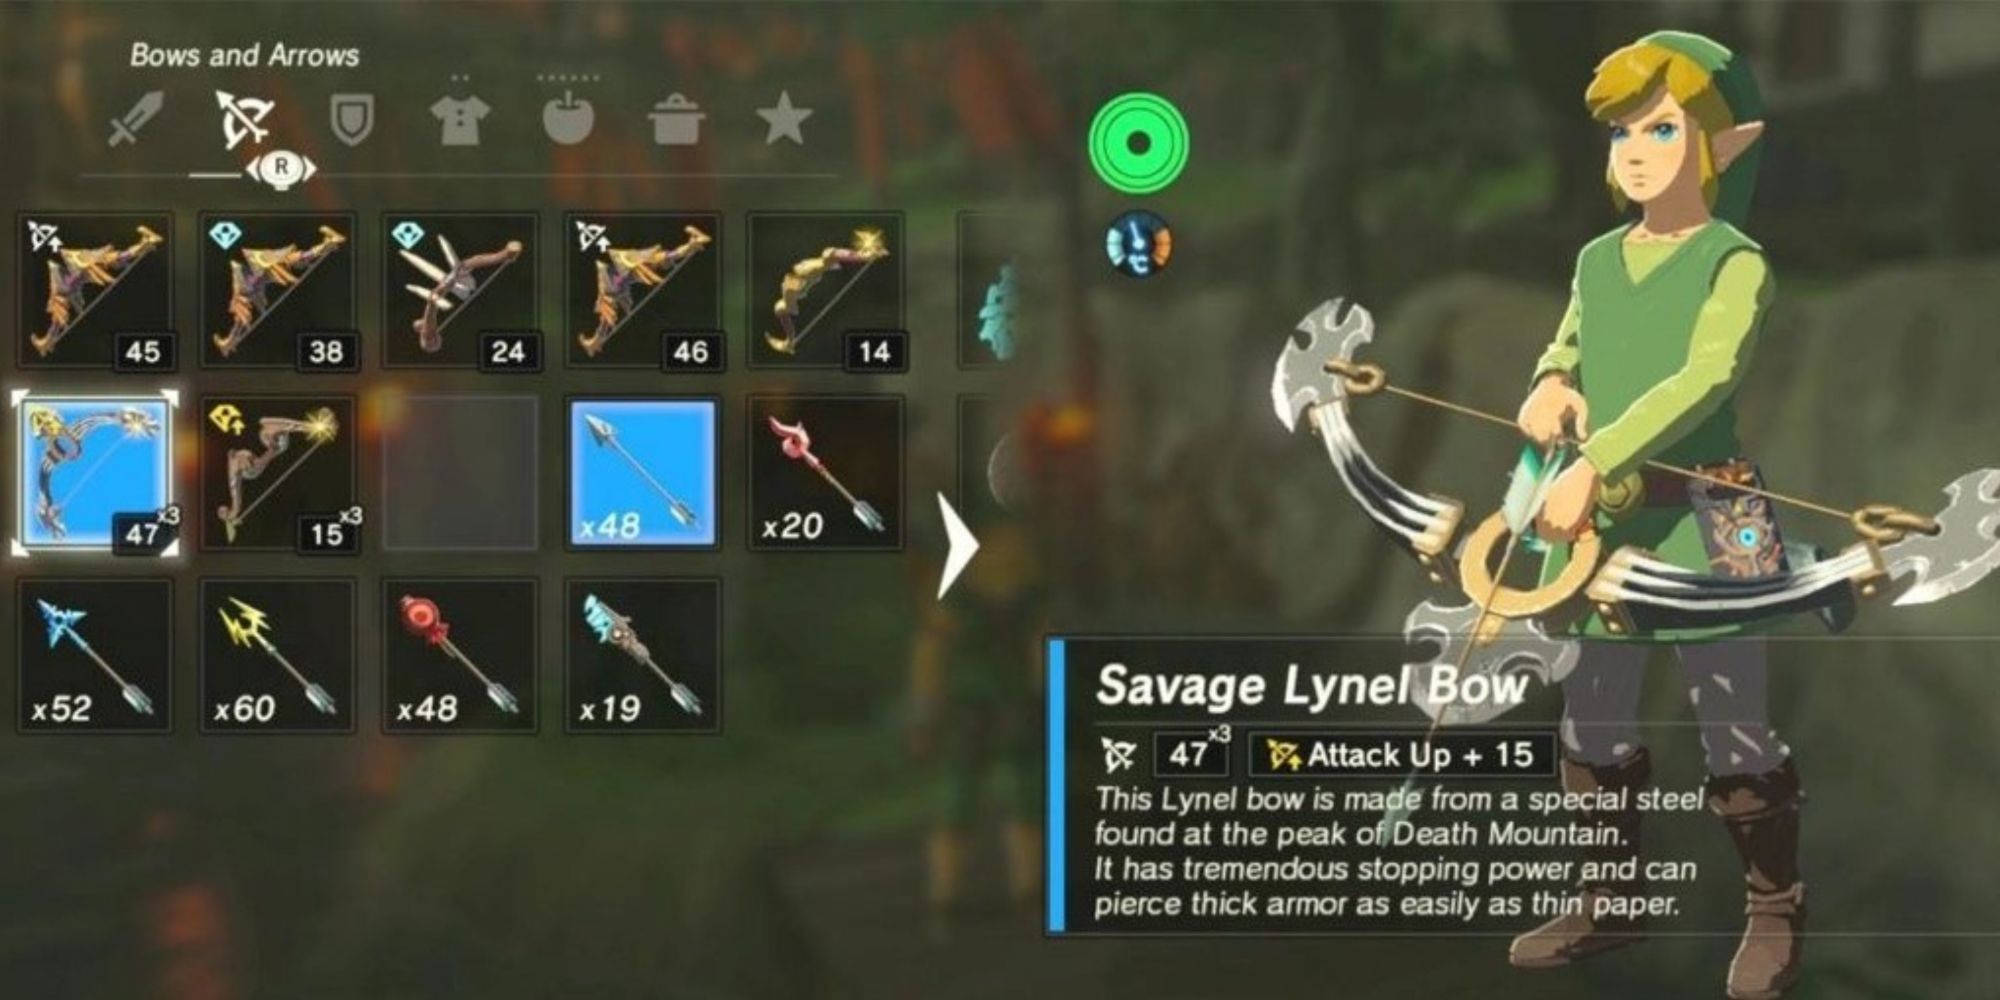 Link holding the Savage Lynel Bow in the menu.